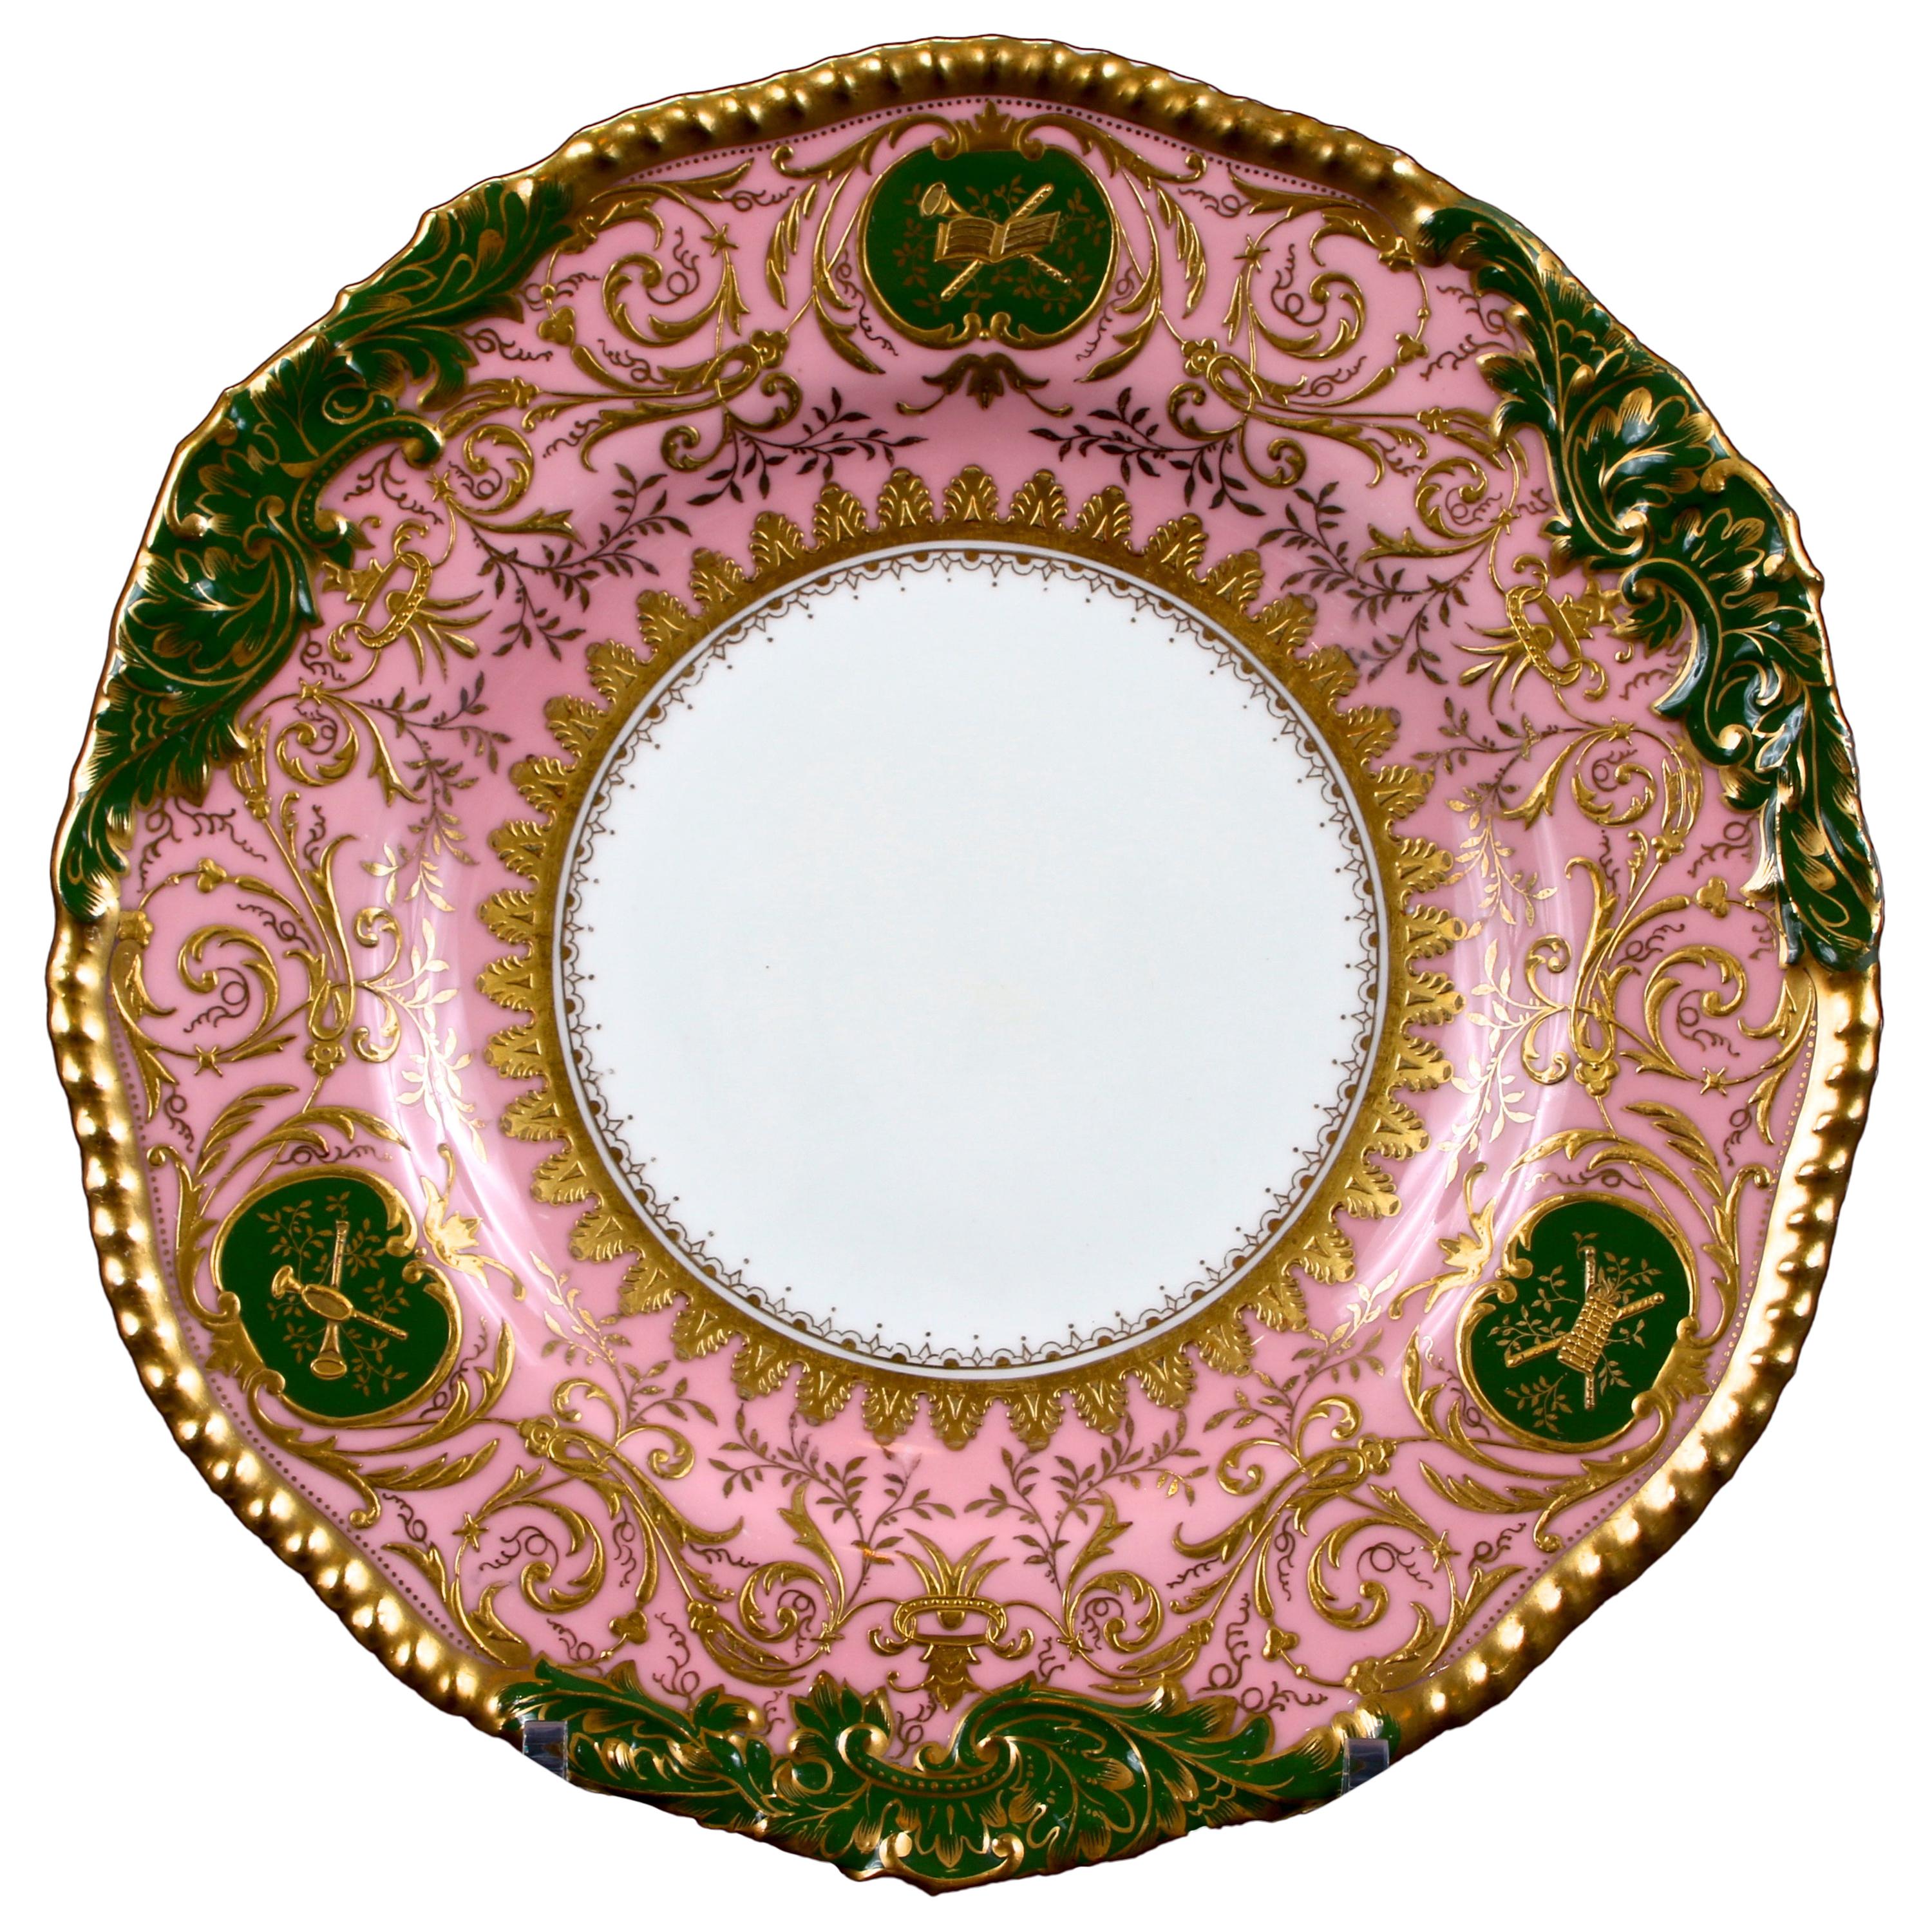 12 Coalport Pink and Green Heavily Gilded Plates Featuring Musical Instruments